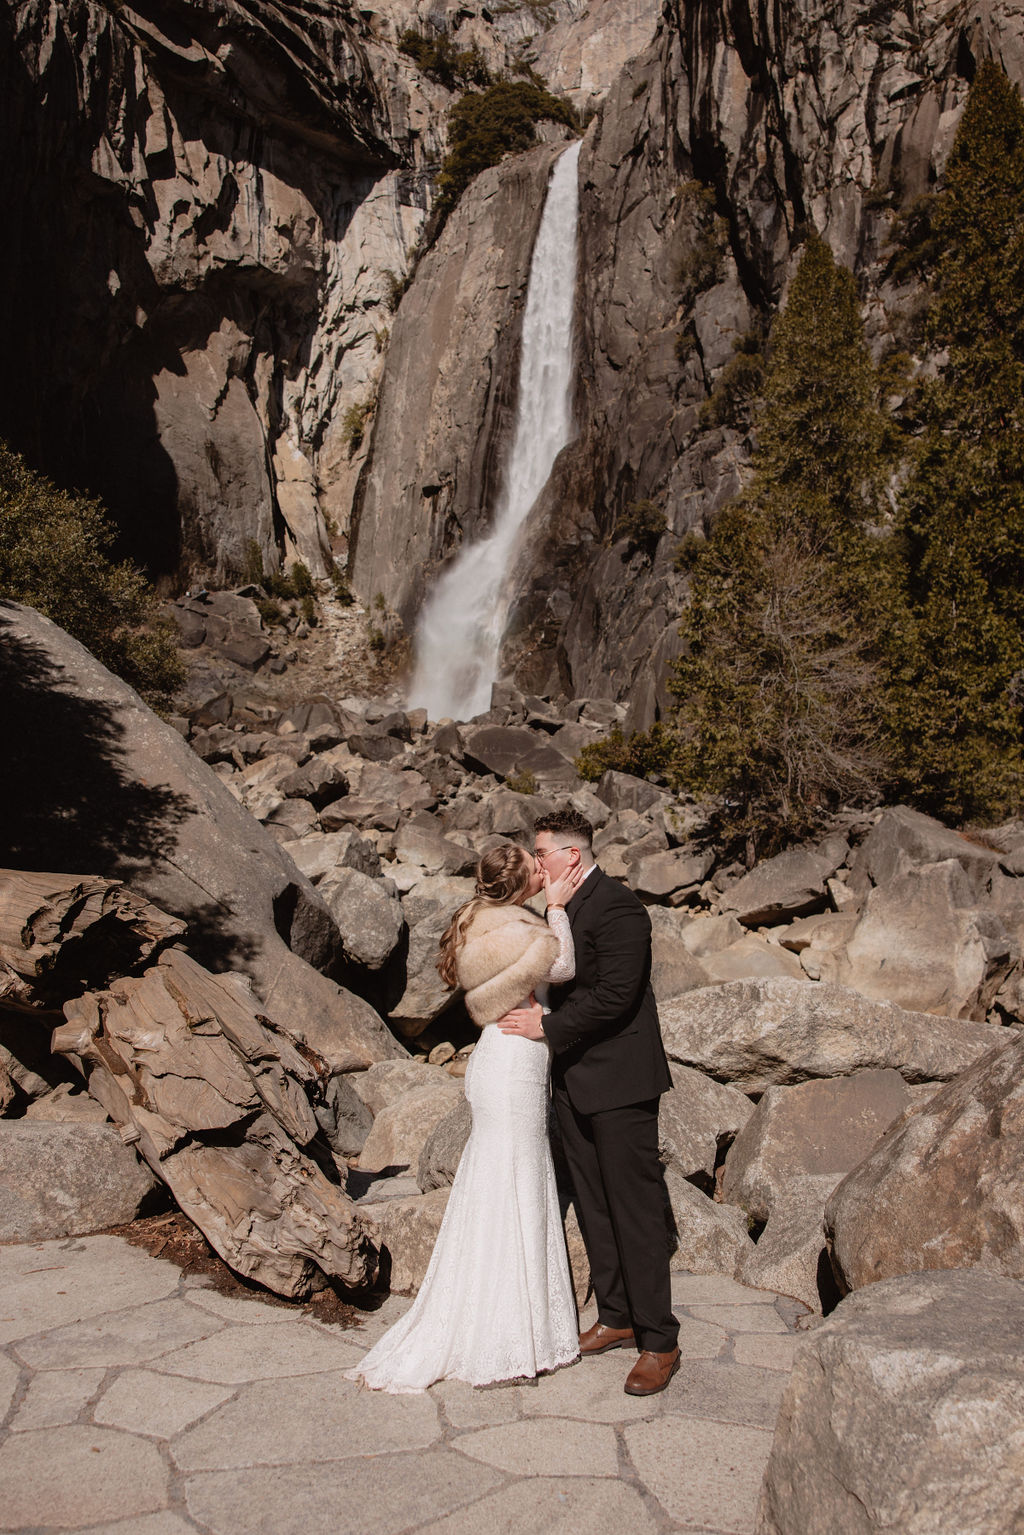 A couple kissing by a waterfall with rocky terrain around them.